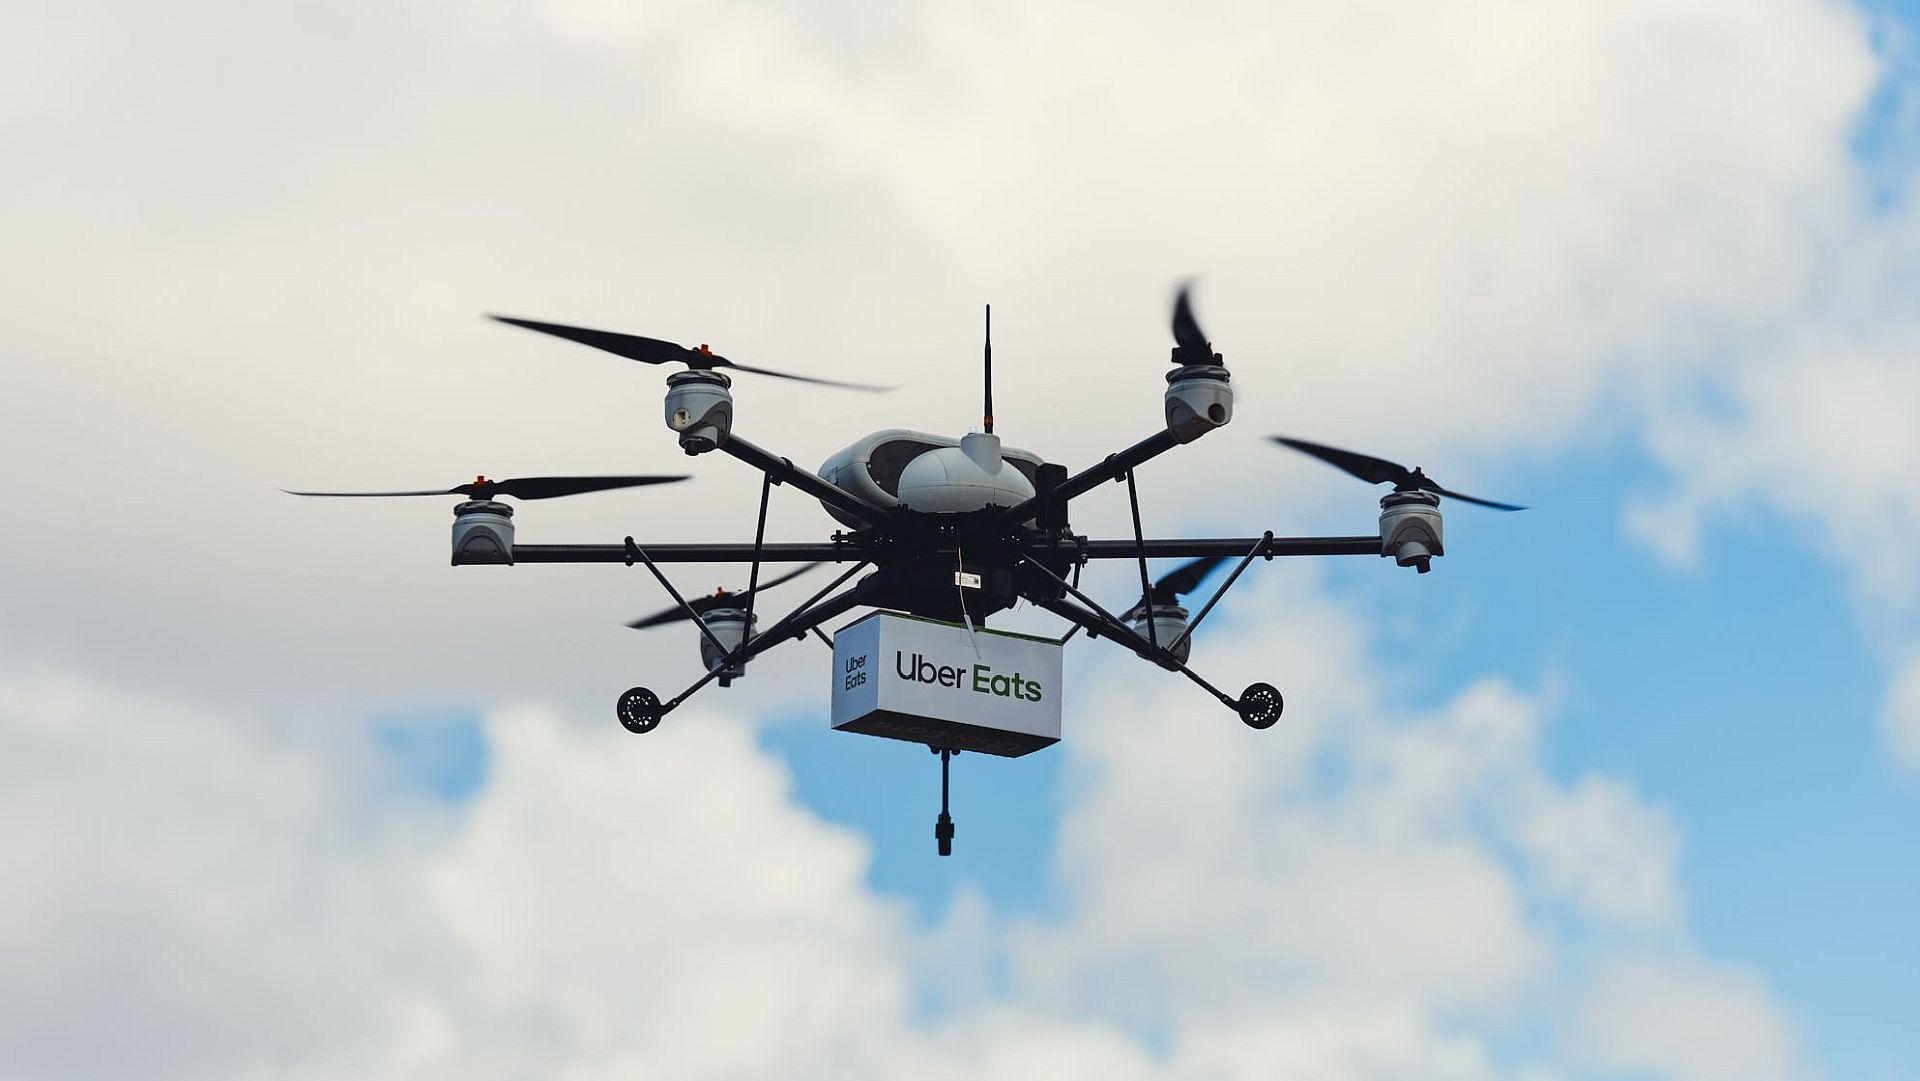 Uber will start drone food delivery service in Q3 this year